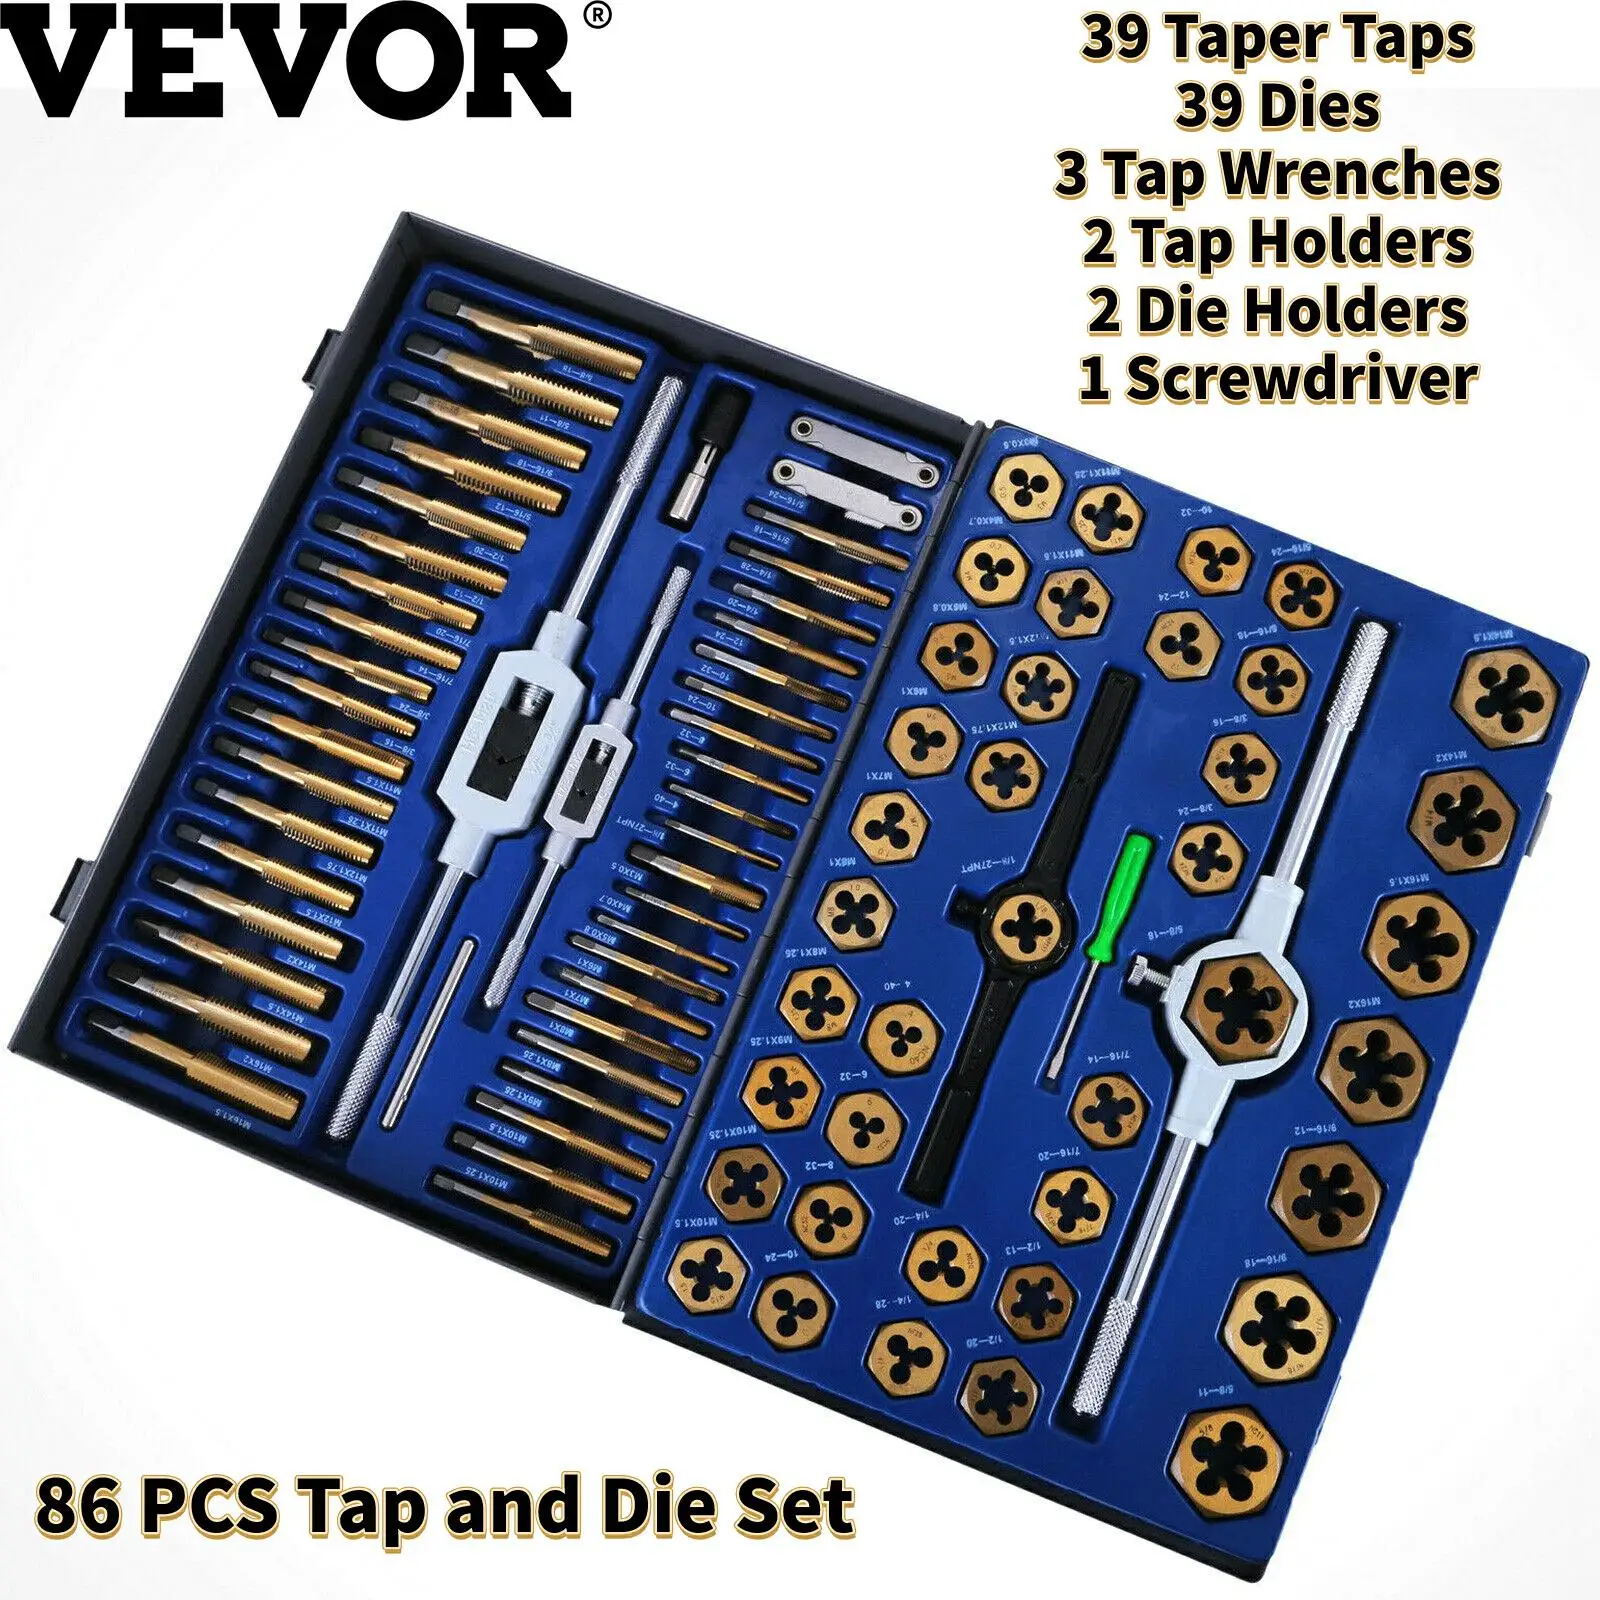 VEVOR 86 PCS Tap and Die Set Drill Tap Set Metric Hand Threading Wrench Tools Tungsten Steel Durable Adjustable W/ Storage Case